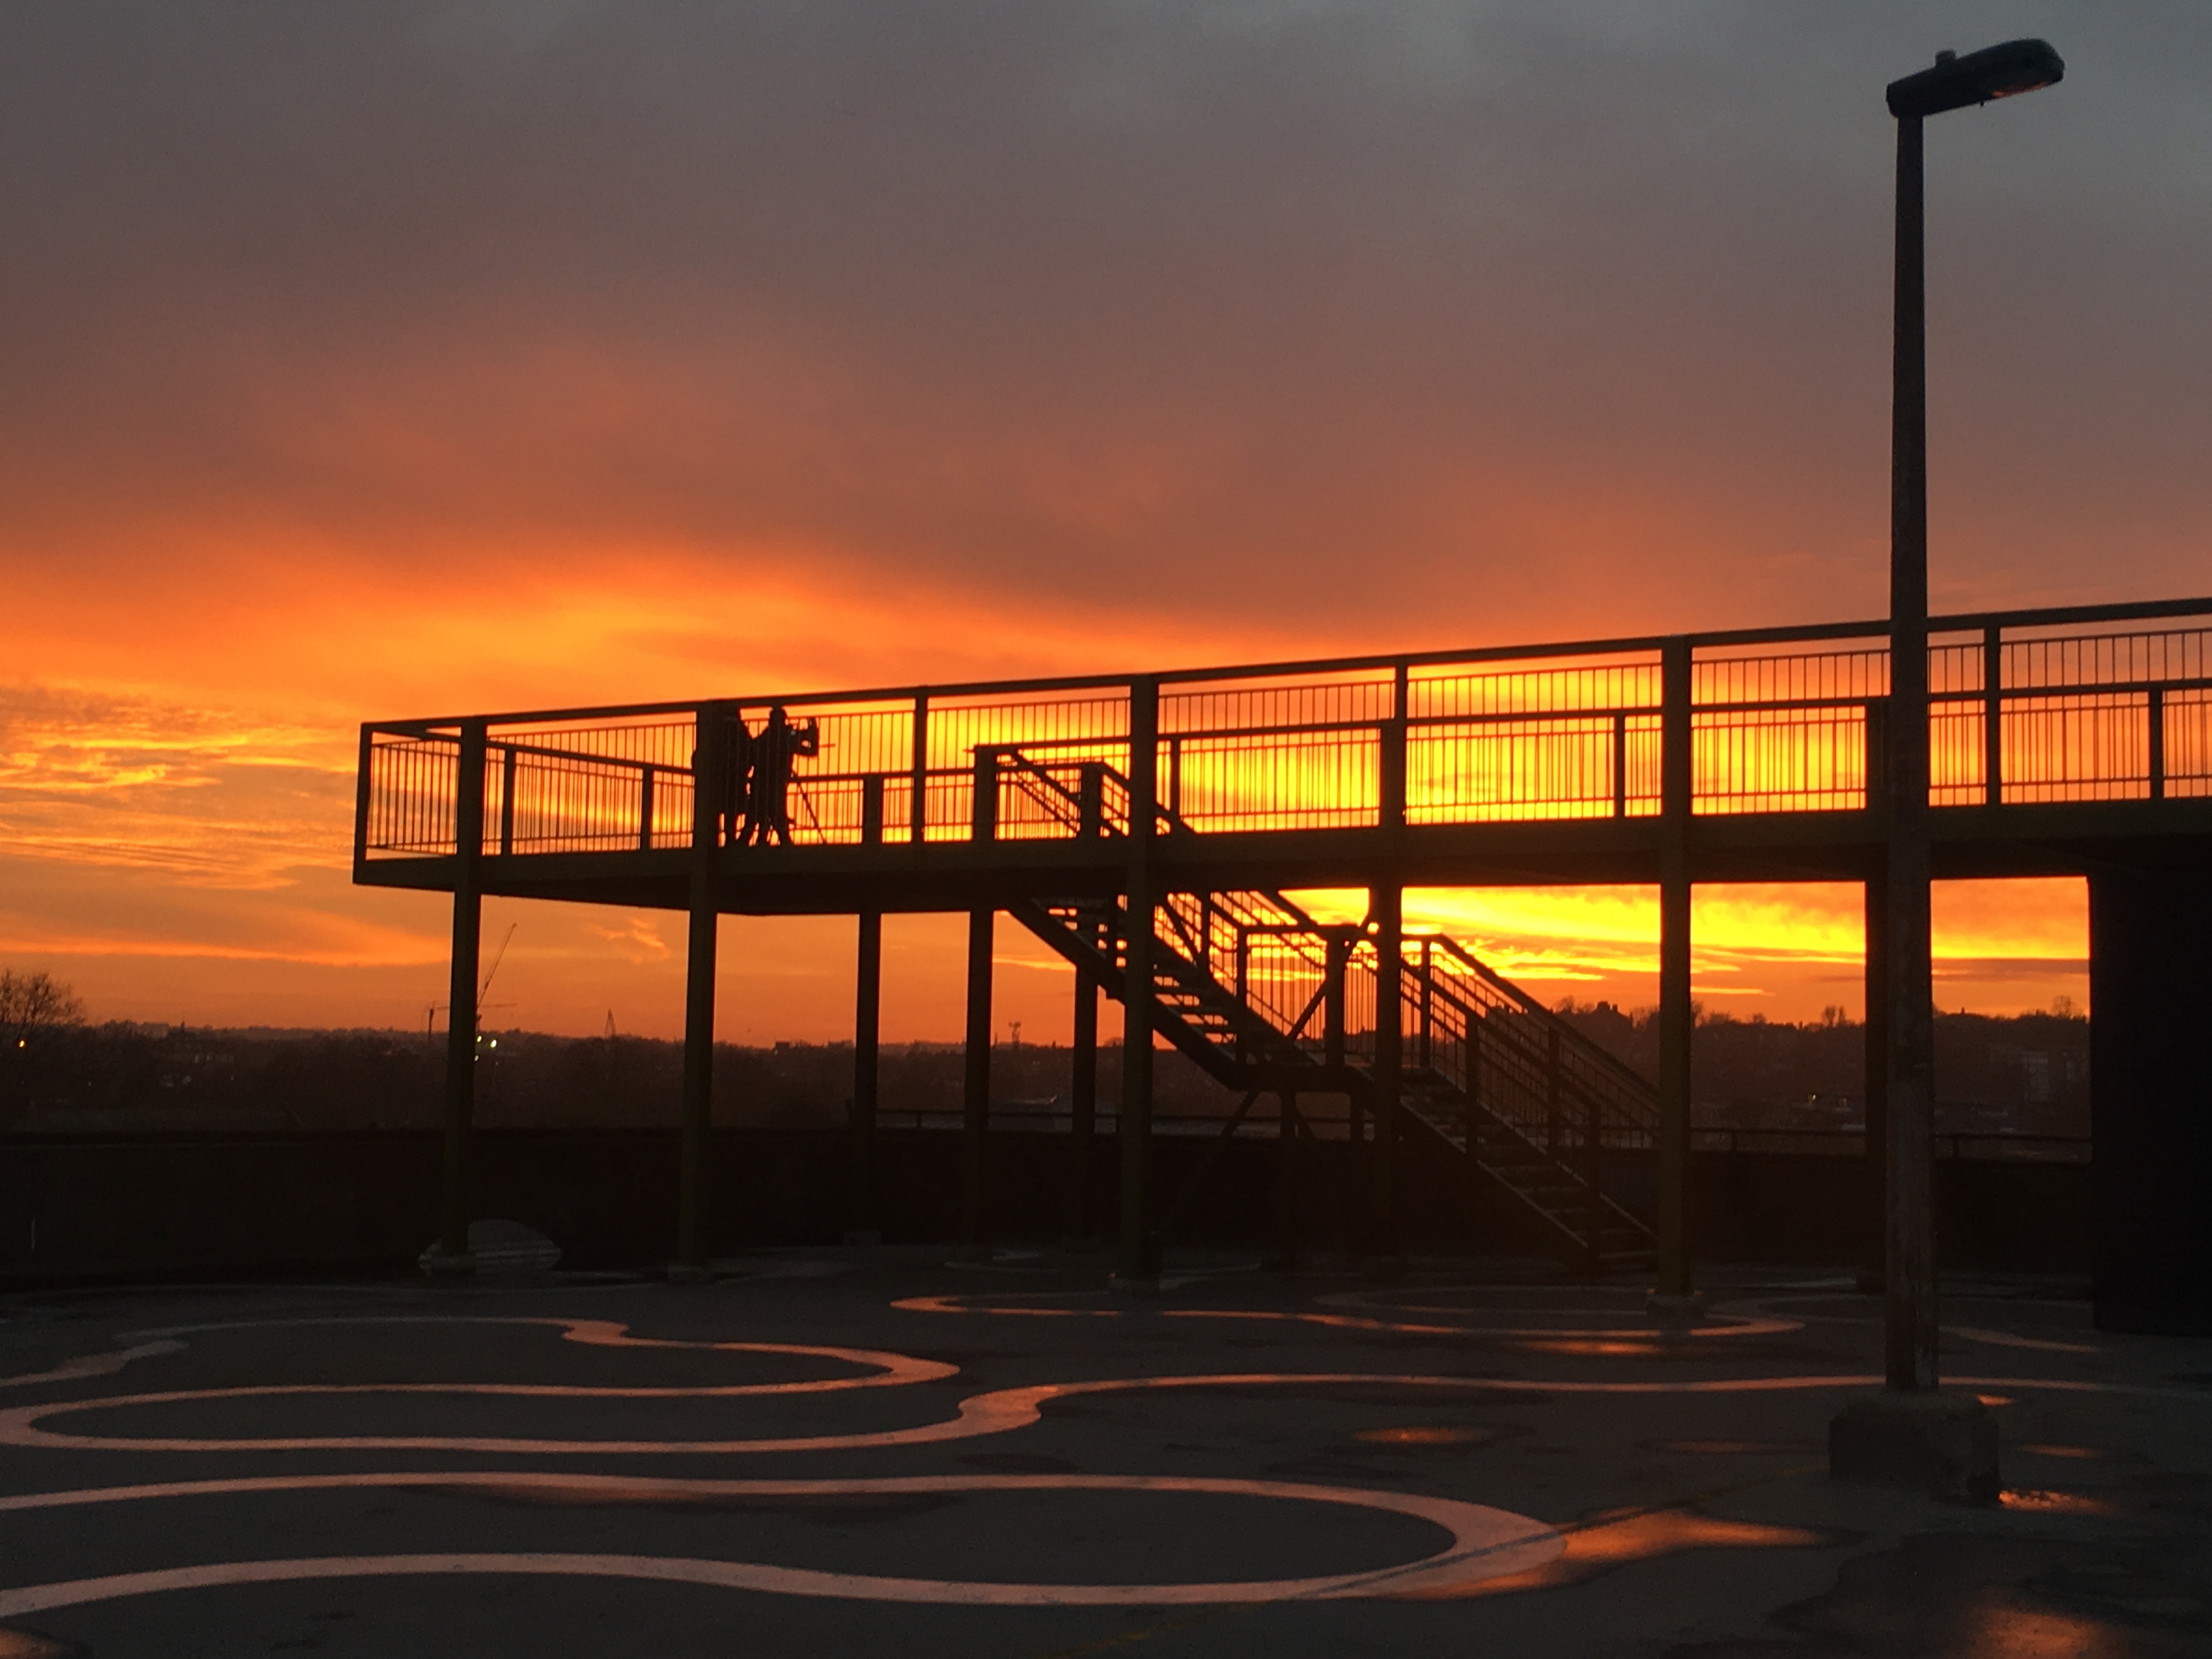 The silhouette of a large steel platform that stands on an expansive concrete rooftop is set against a vivid and warm orange sunset.